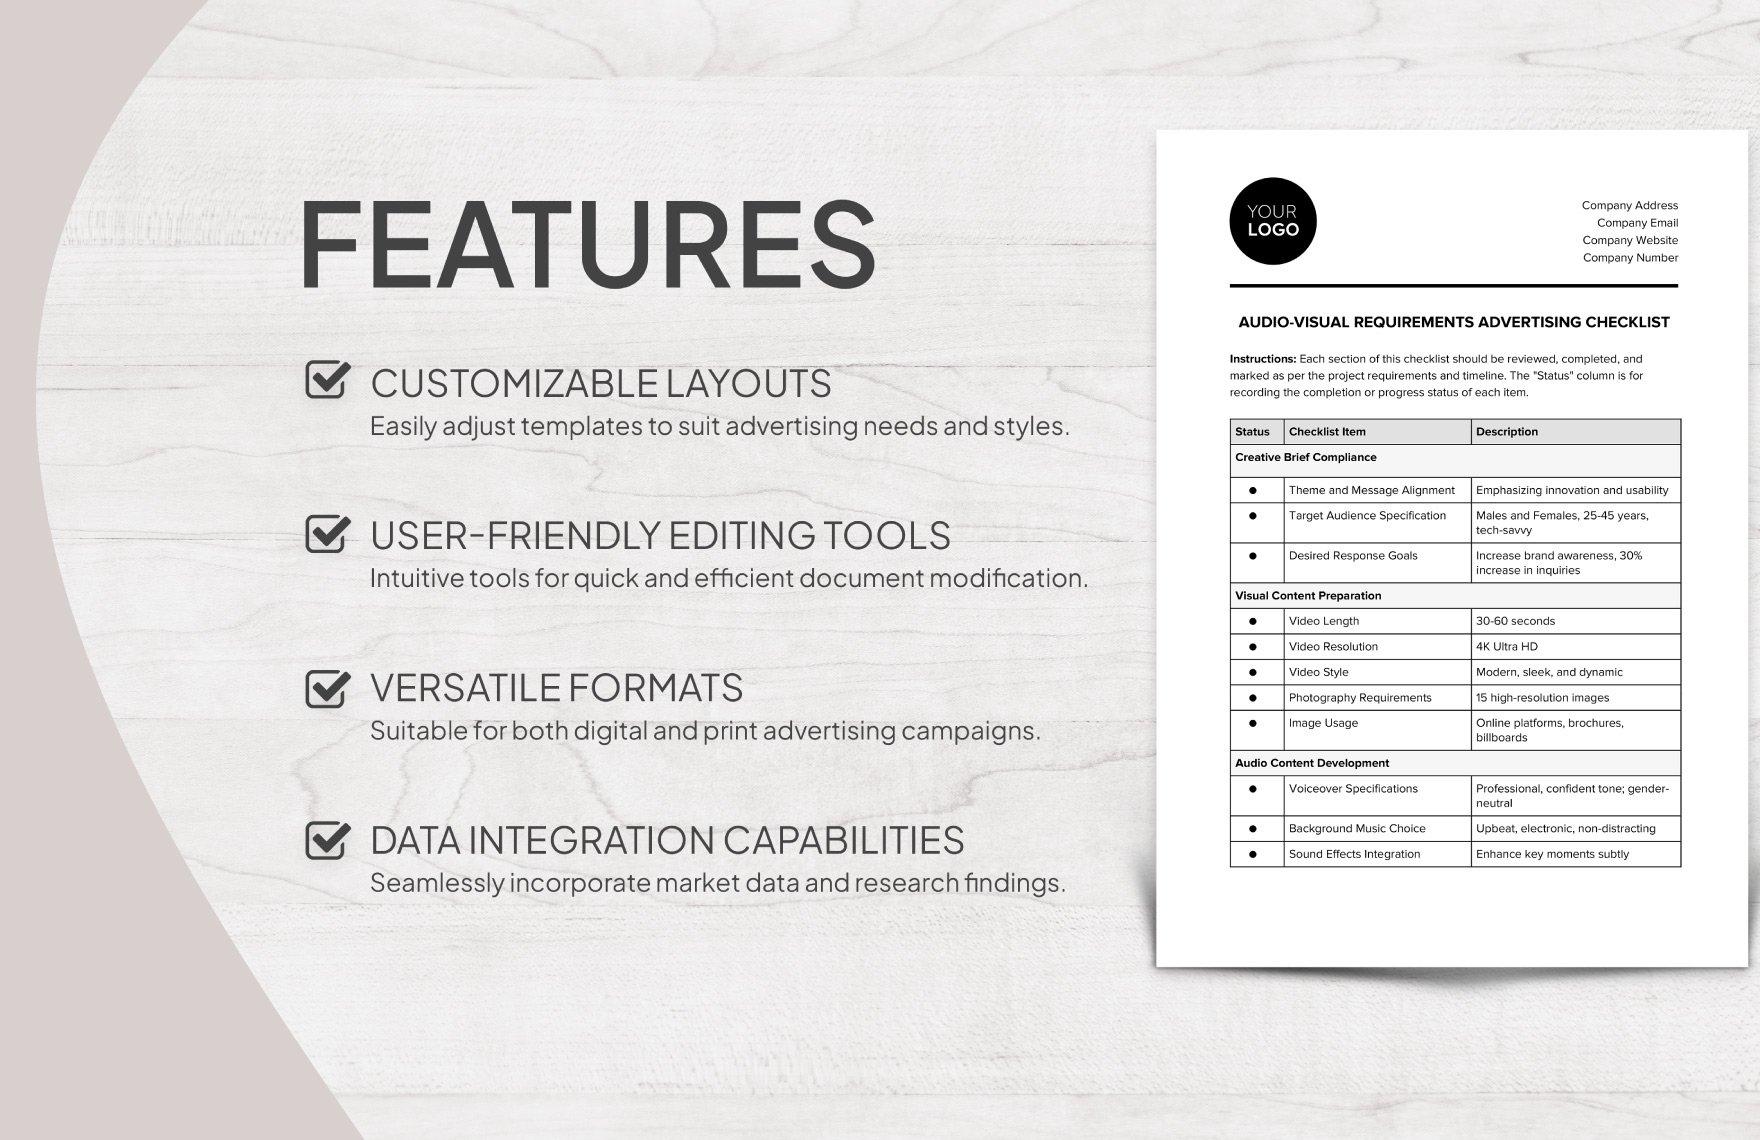 Audio-Visual Requirements Advertising Checklist Template